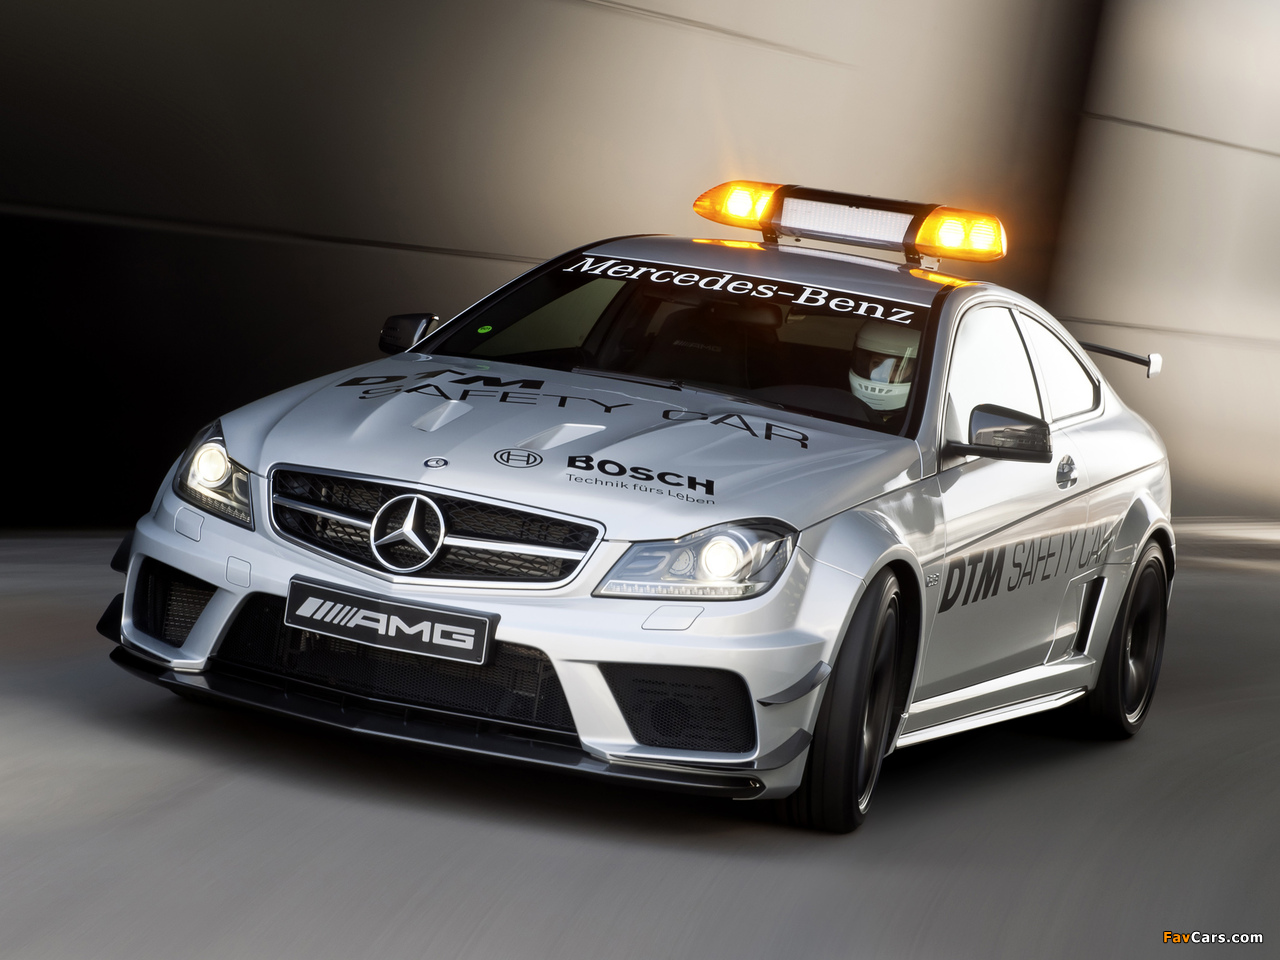 Mercedes-Benz C 63 AMG Black Series Coupe DTM Safety Car (C204) 2012 pictures (1280 x 960)